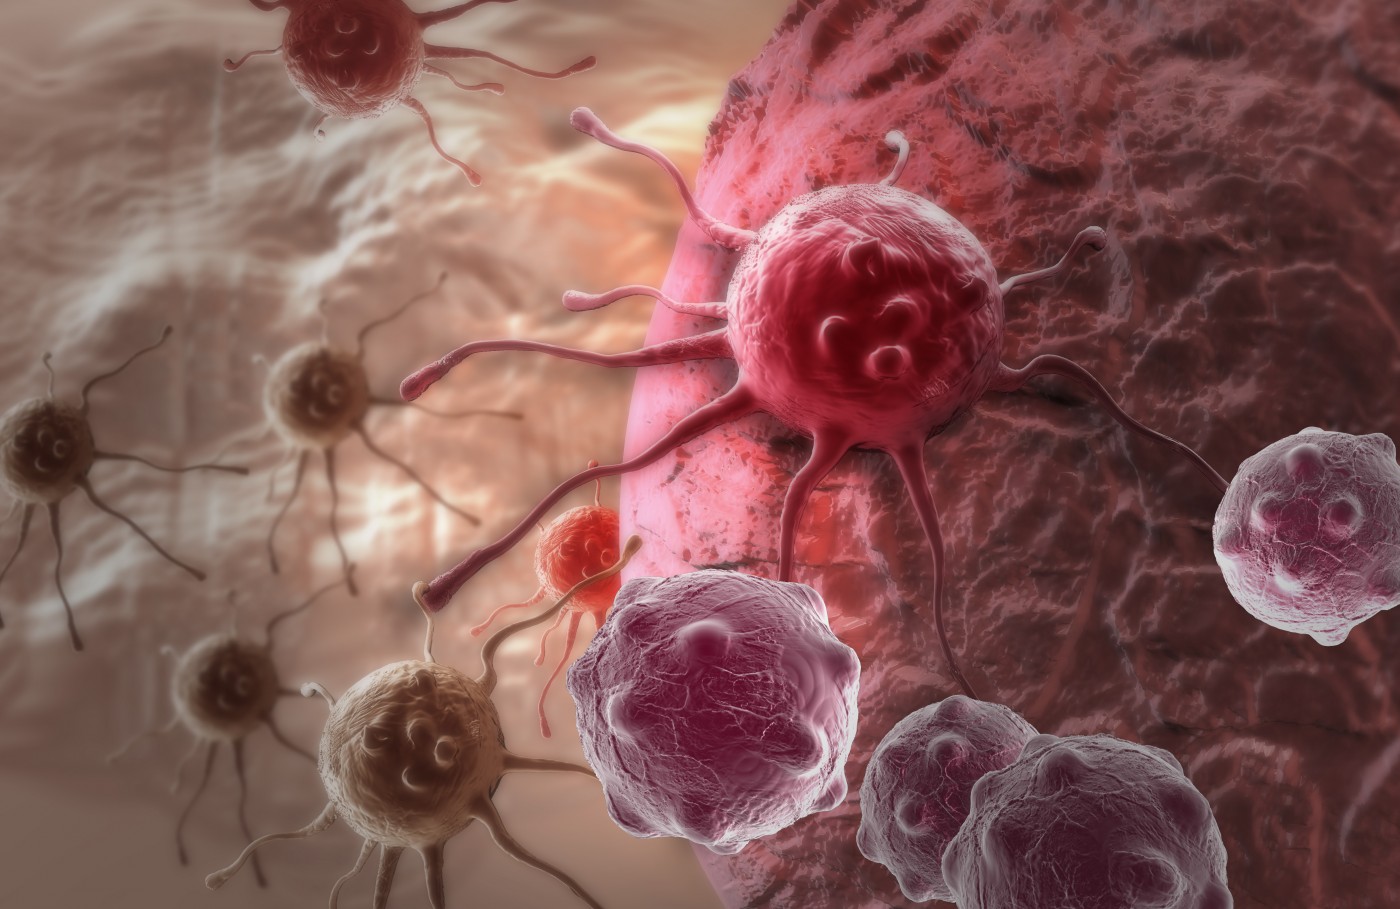 HER2-Positive Breast Cancer Shows Strong Immune Response to Single Dose of Trastuzumab